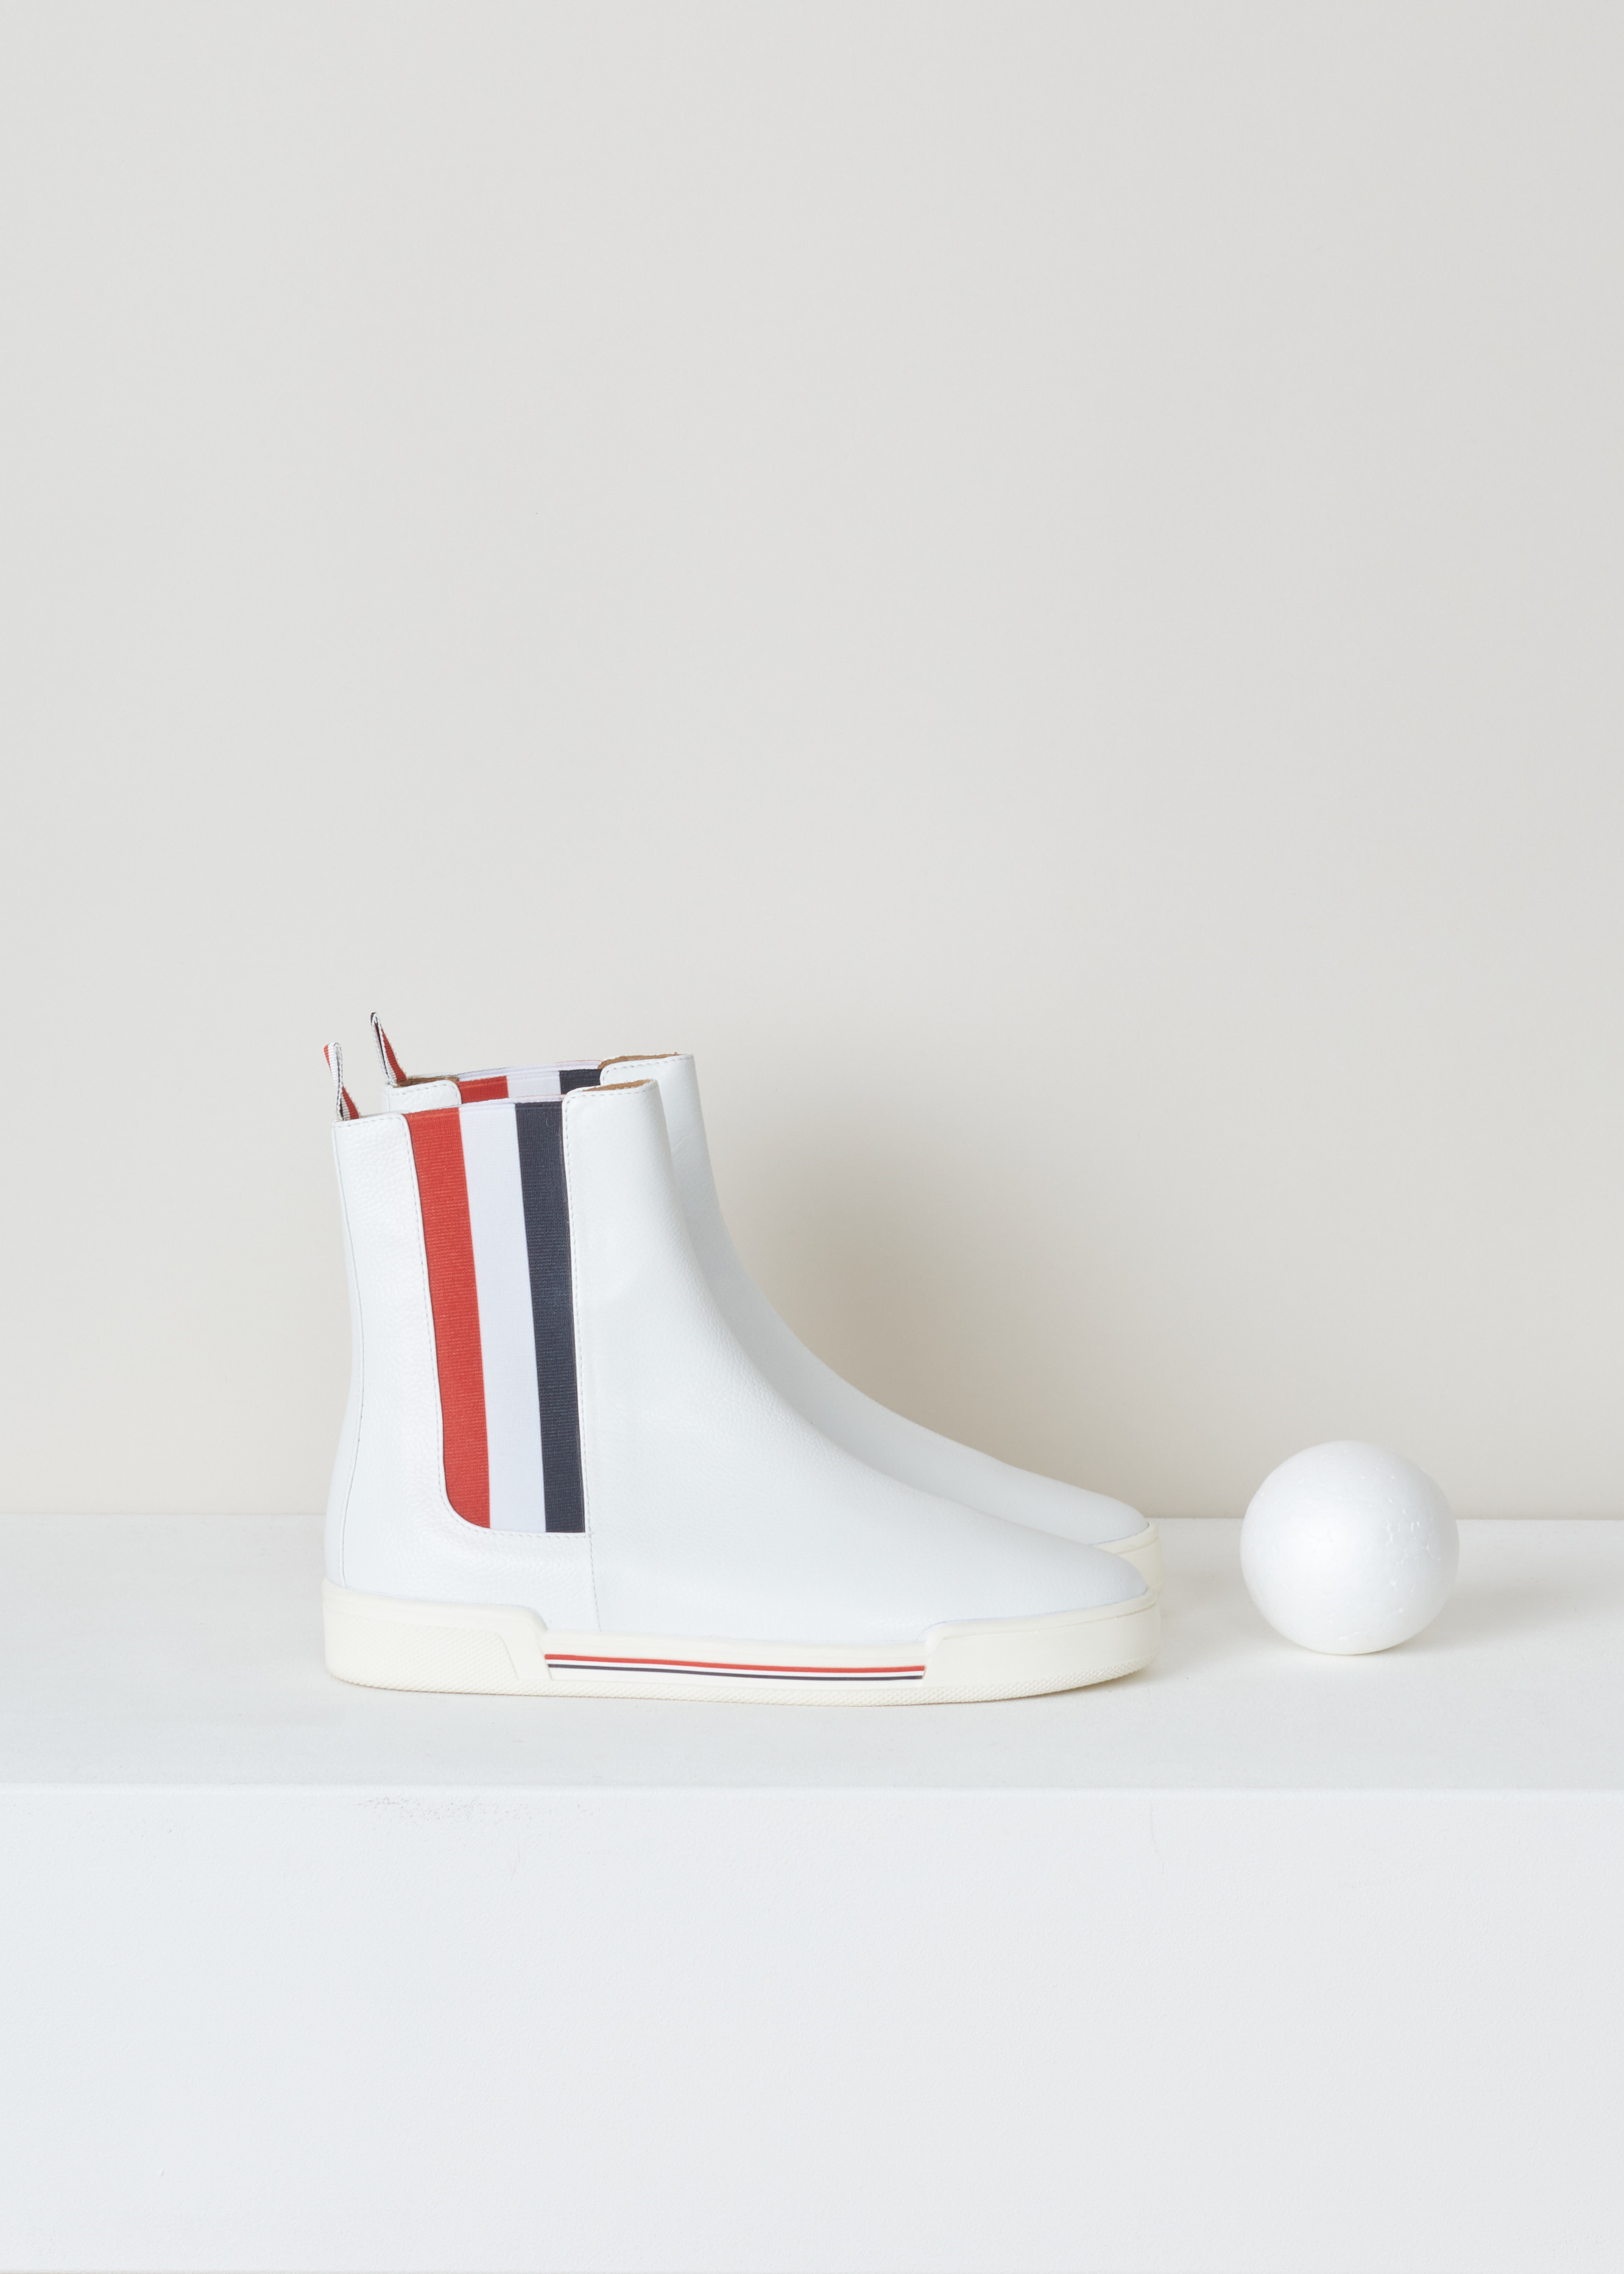 Thom Browne Chelsea boot sneaker white FFB056B_03542_100 white side. White leather chelsea boot with red and blue striped elastic side panels, a rounded toe, a pull tab at the back and a white rubber sole with red and blue detailing. 